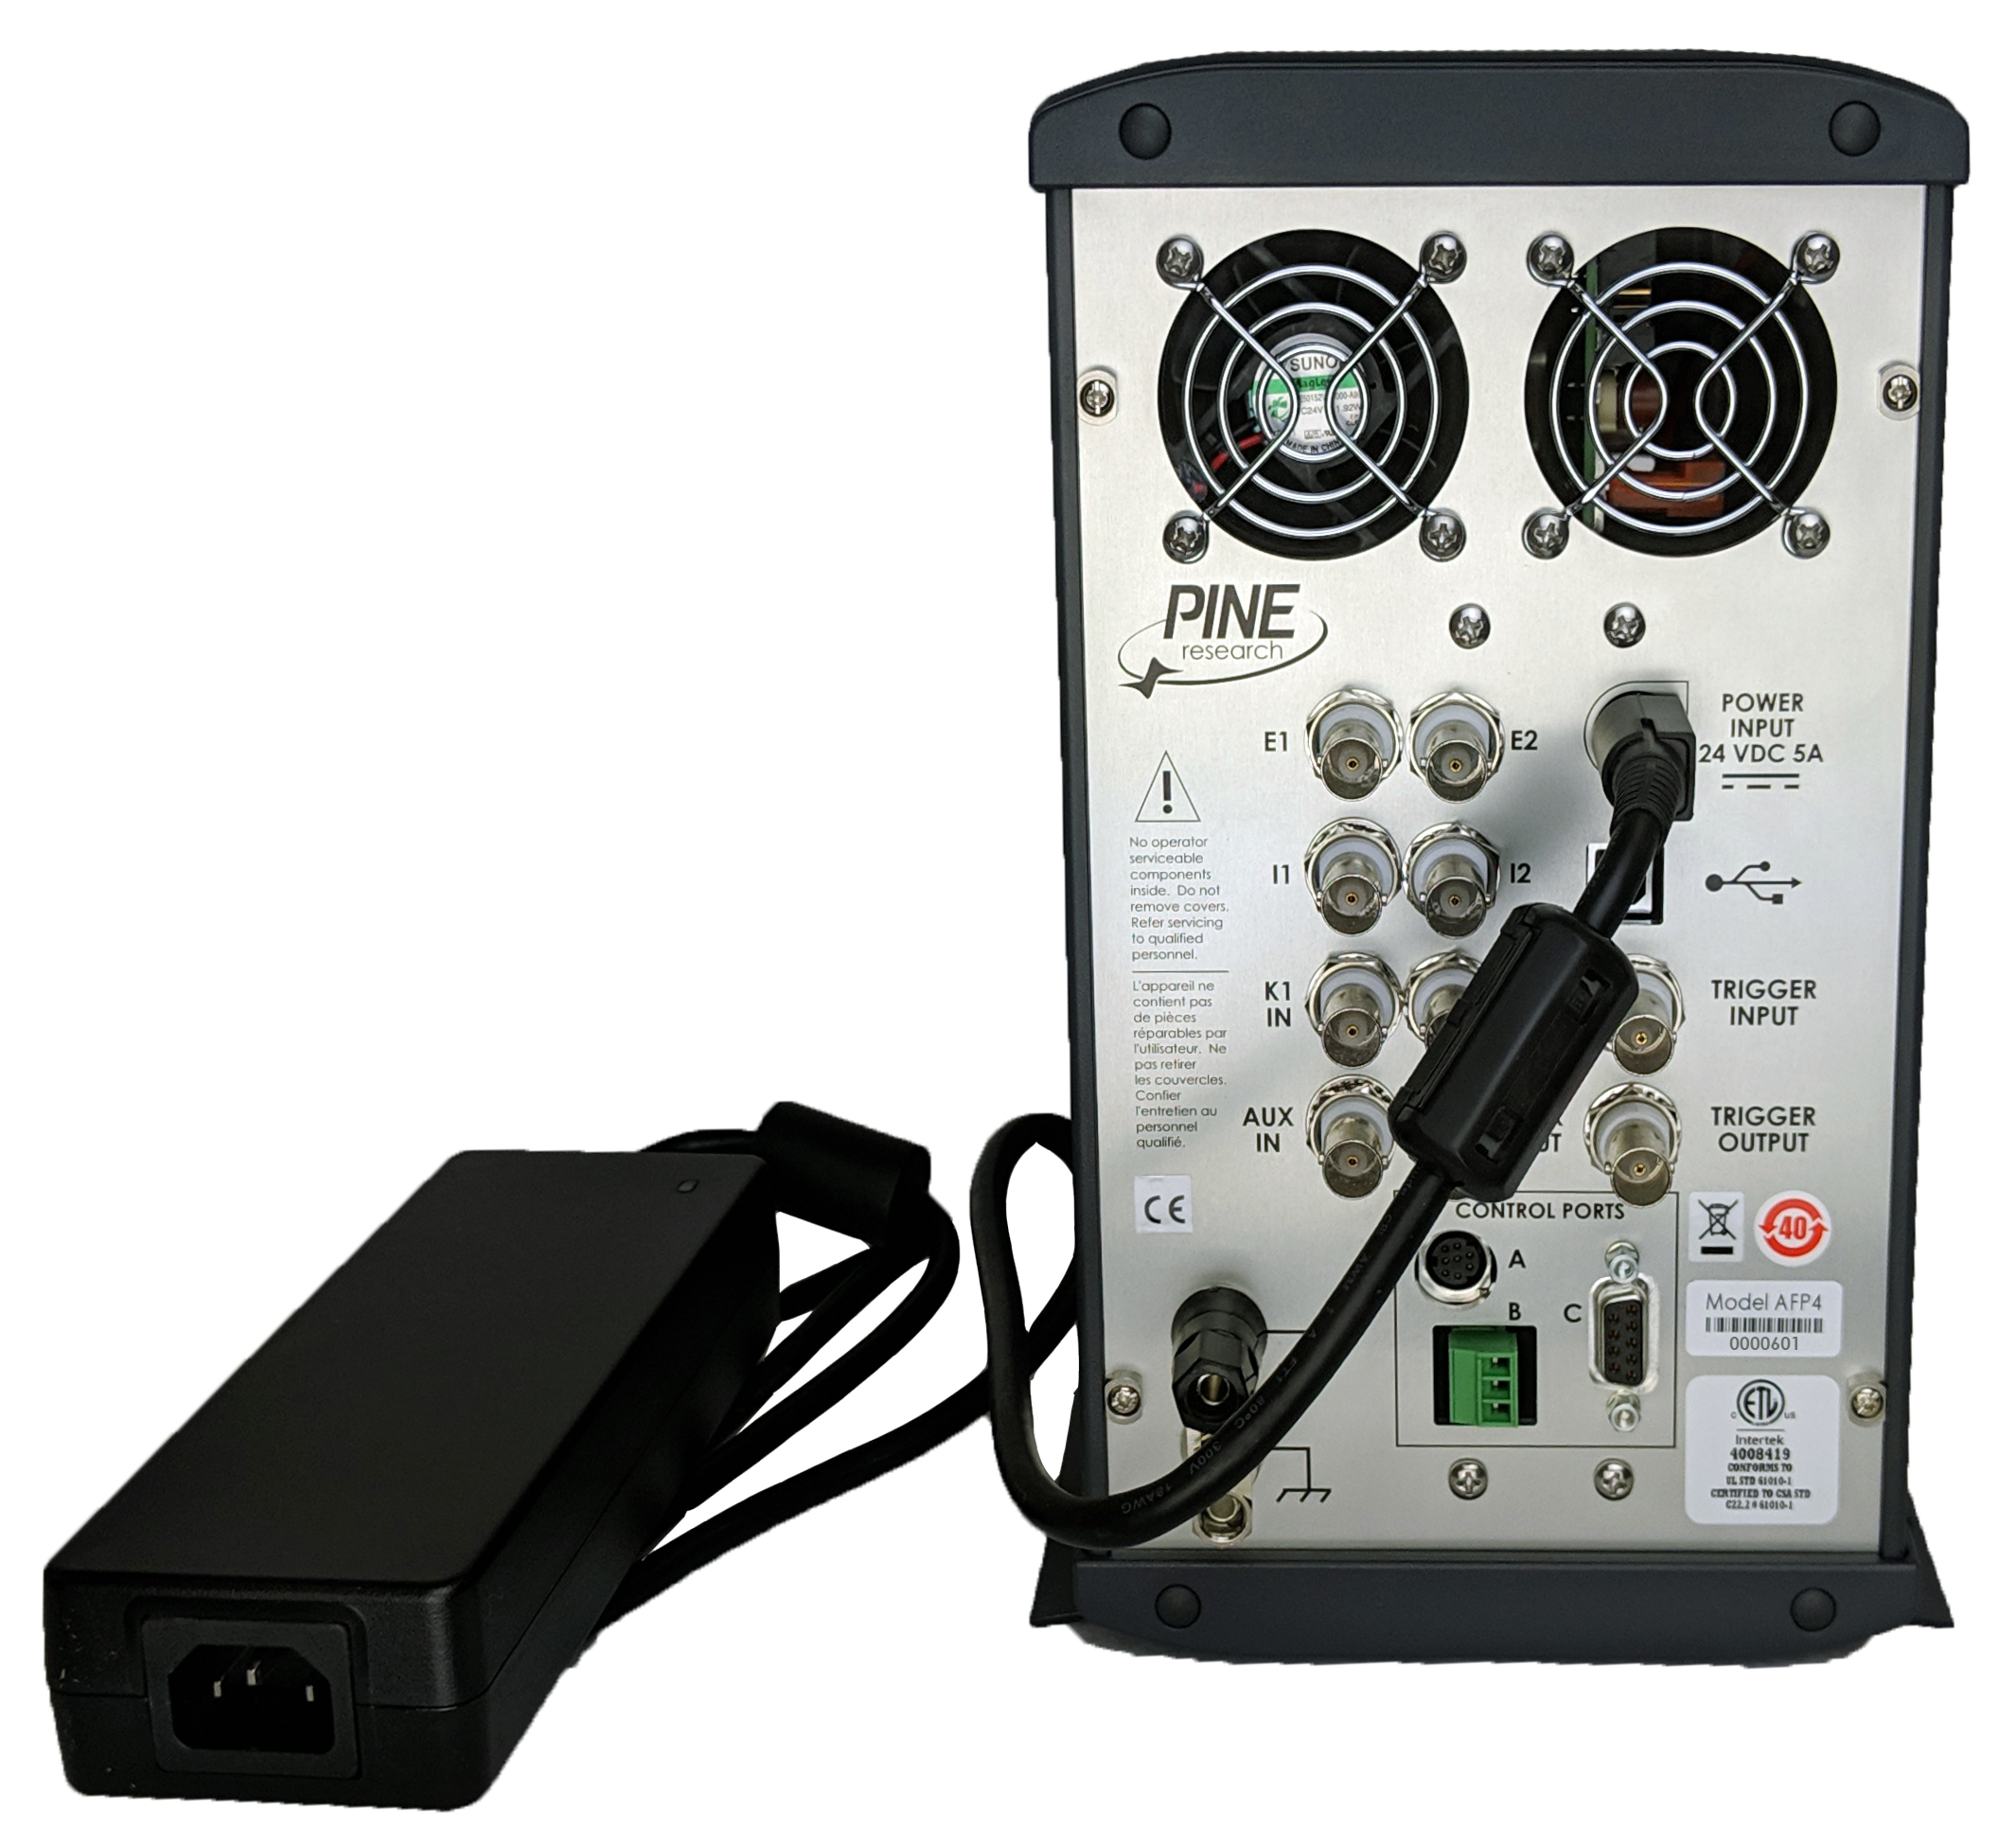 Power Supply with Low Voltage (24 VDC) Cable Connection to Back Panel